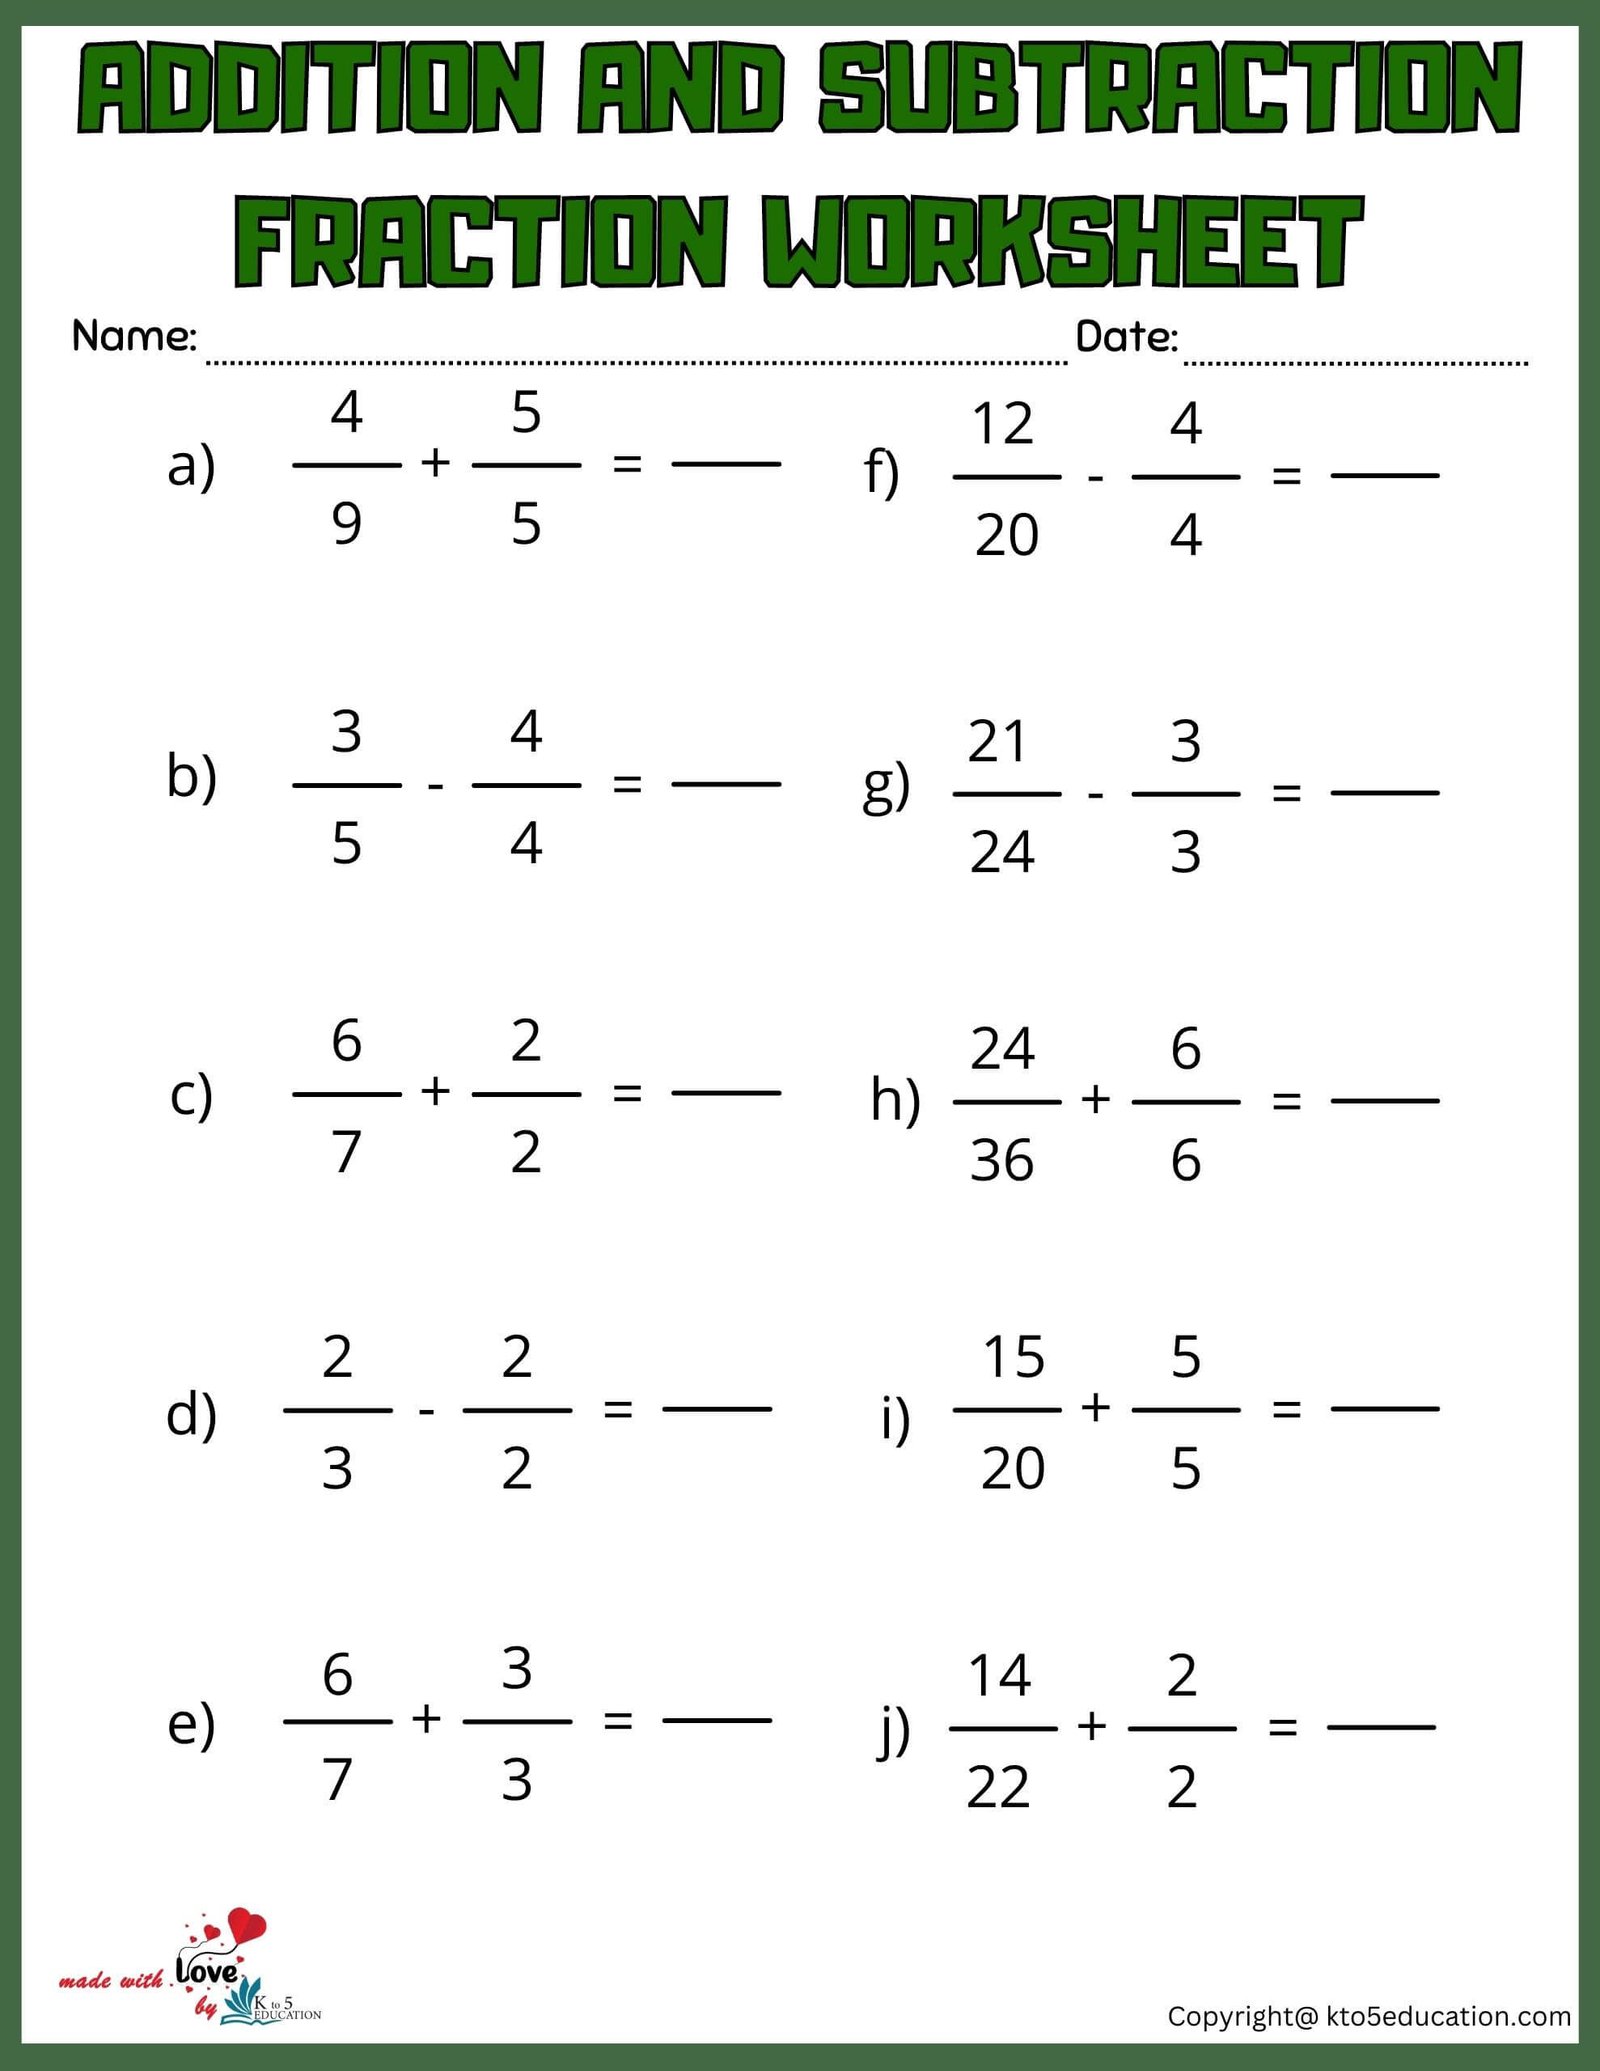 Free Addition And Subtraction Fraction Worksheet For Practice